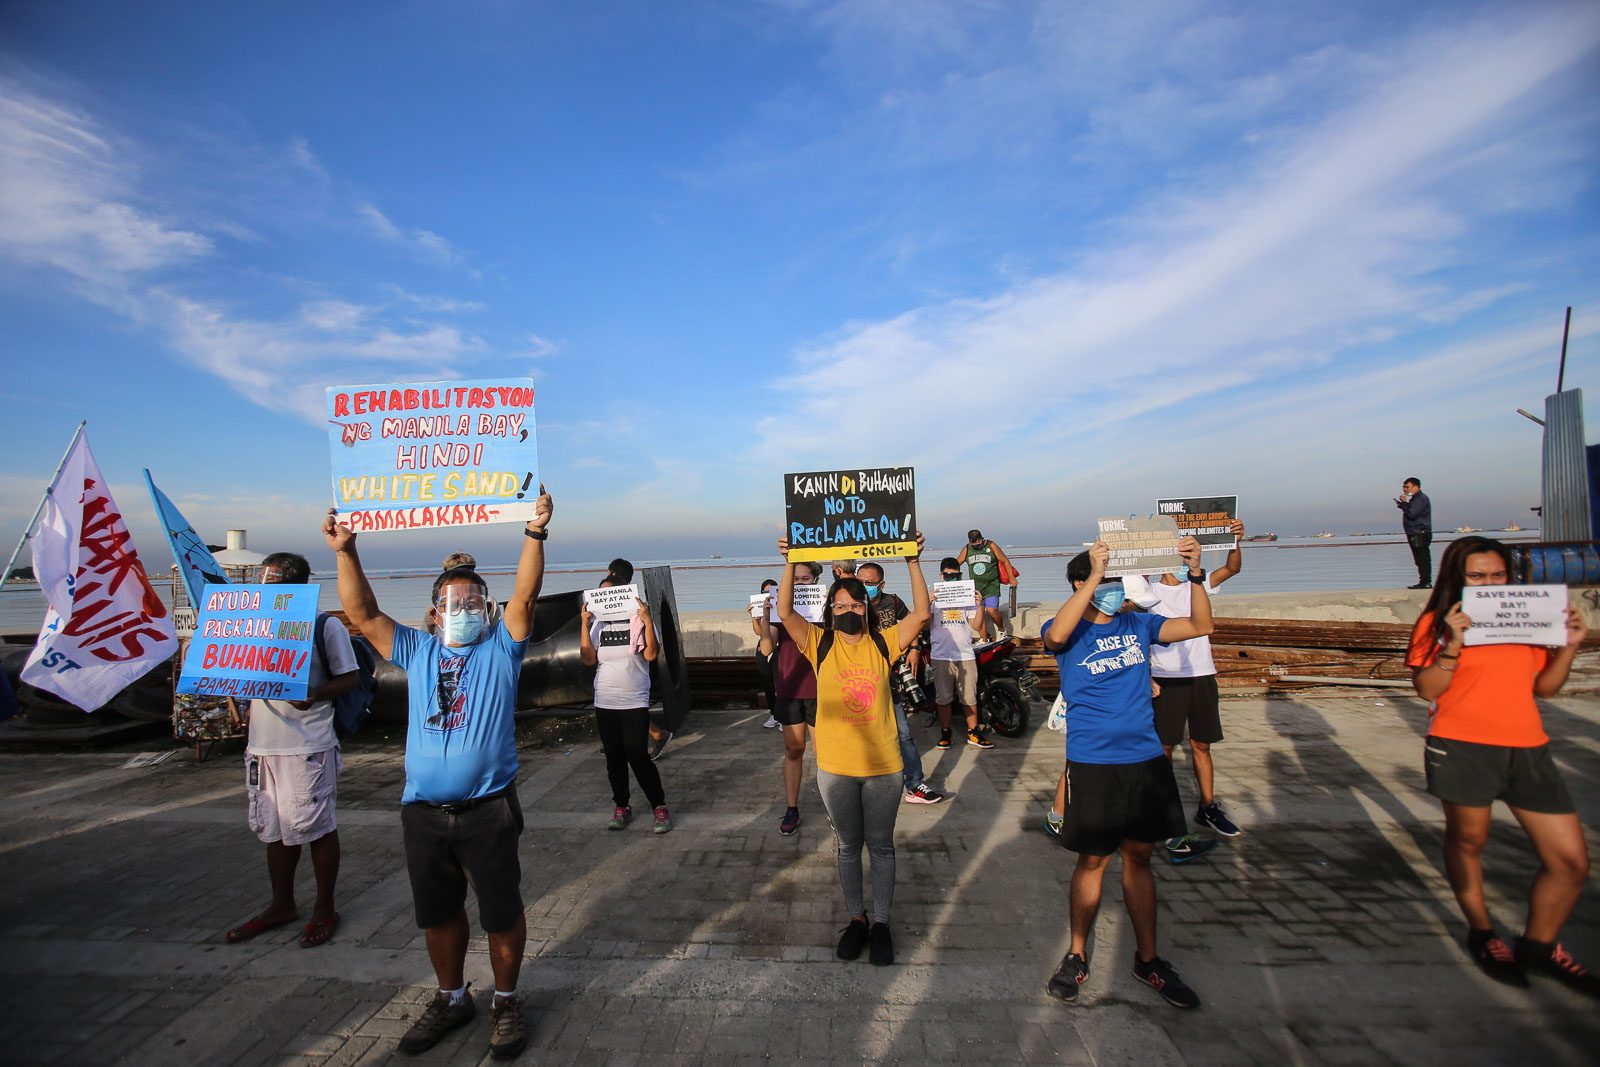 Where will rest of P389M go? Group calls for transparency in Manila Bay white sand project